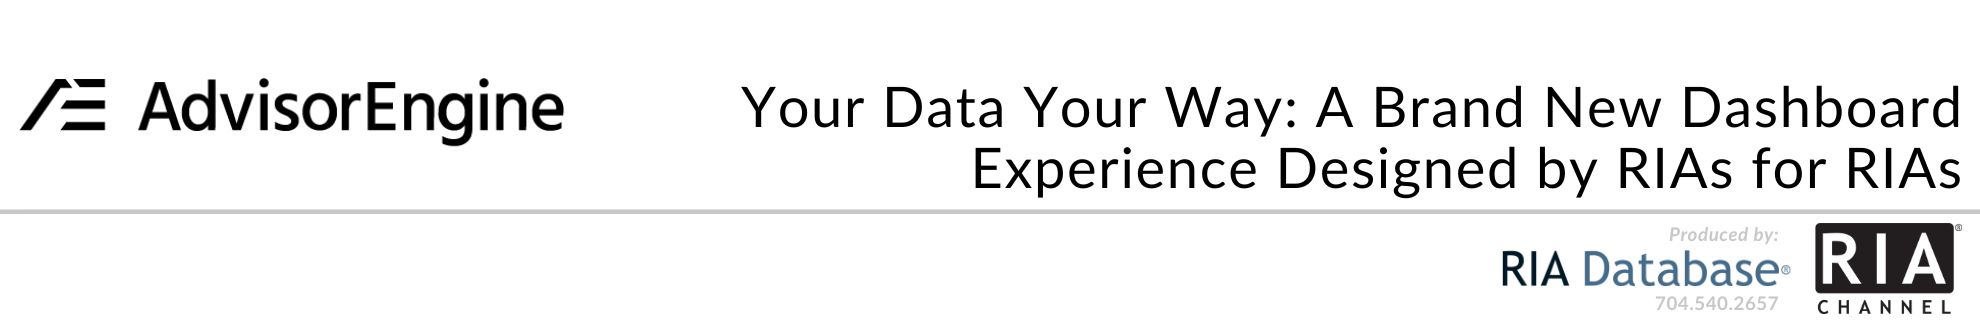 Your Data Your Way: A Brand New Dashboard Experience Designed by RIAs for RIAs